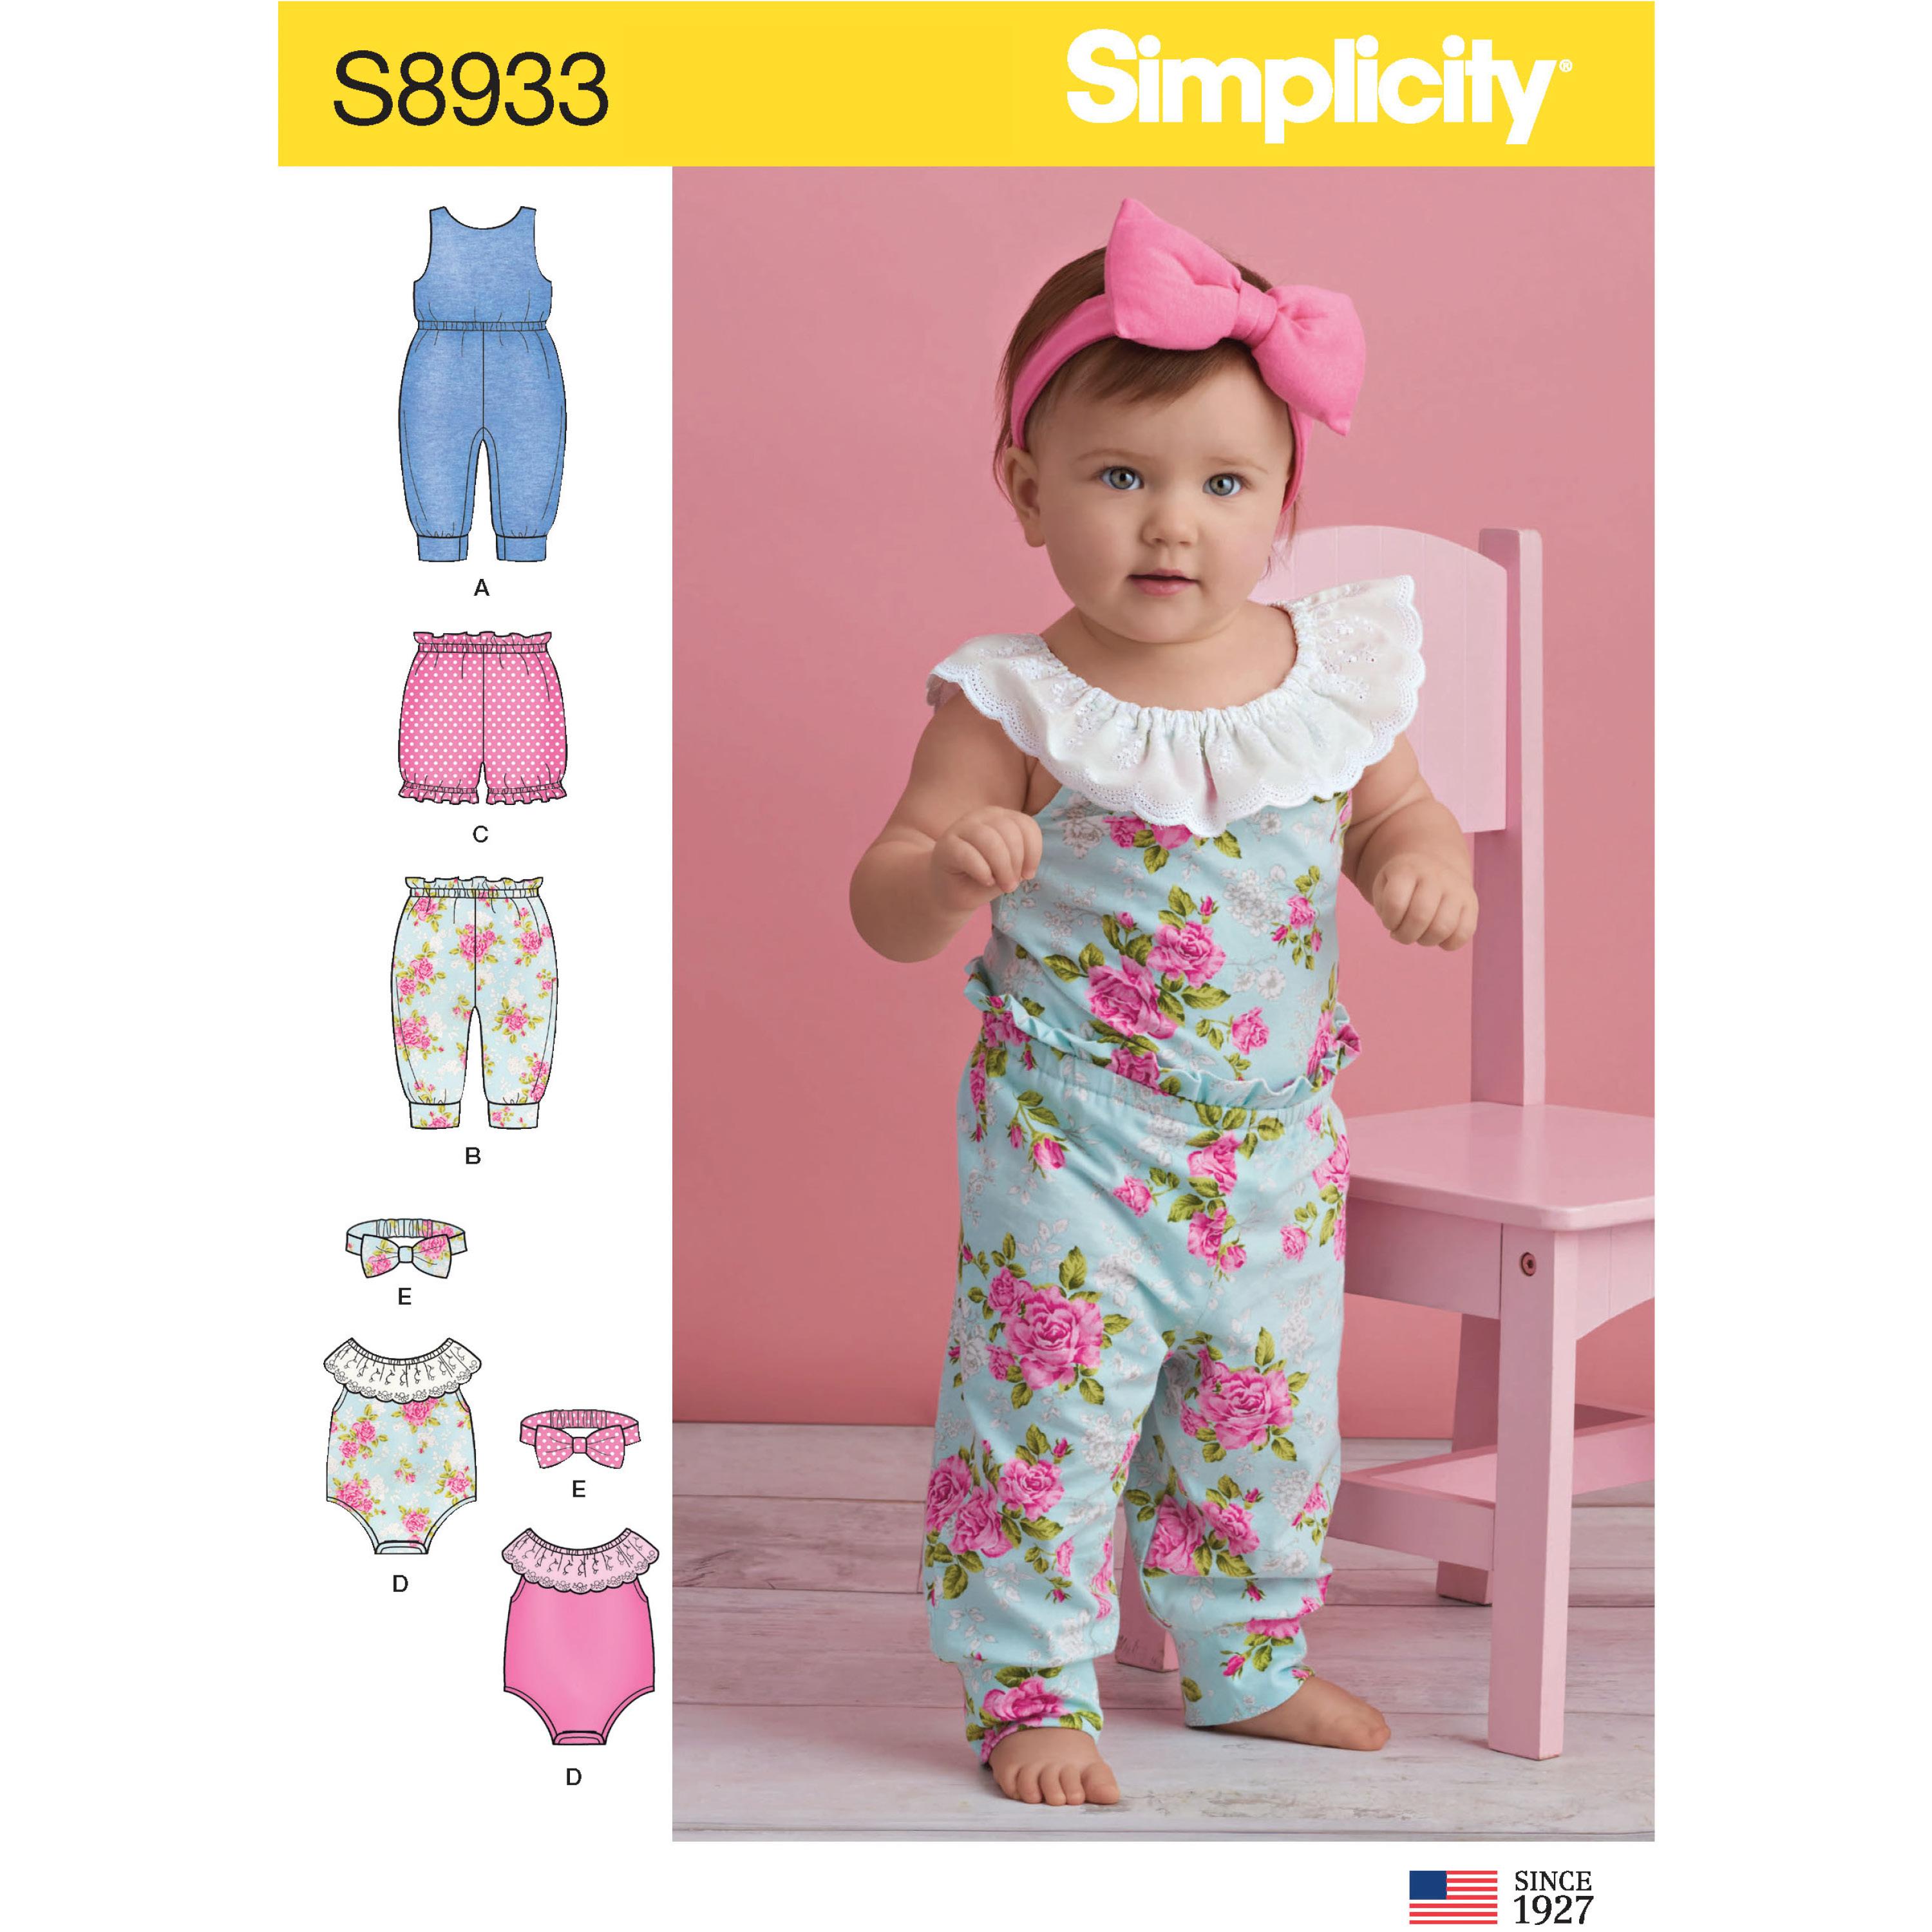 Simplicity S8933 Babies' Knit Rompers, Pants, Shorts and Headband